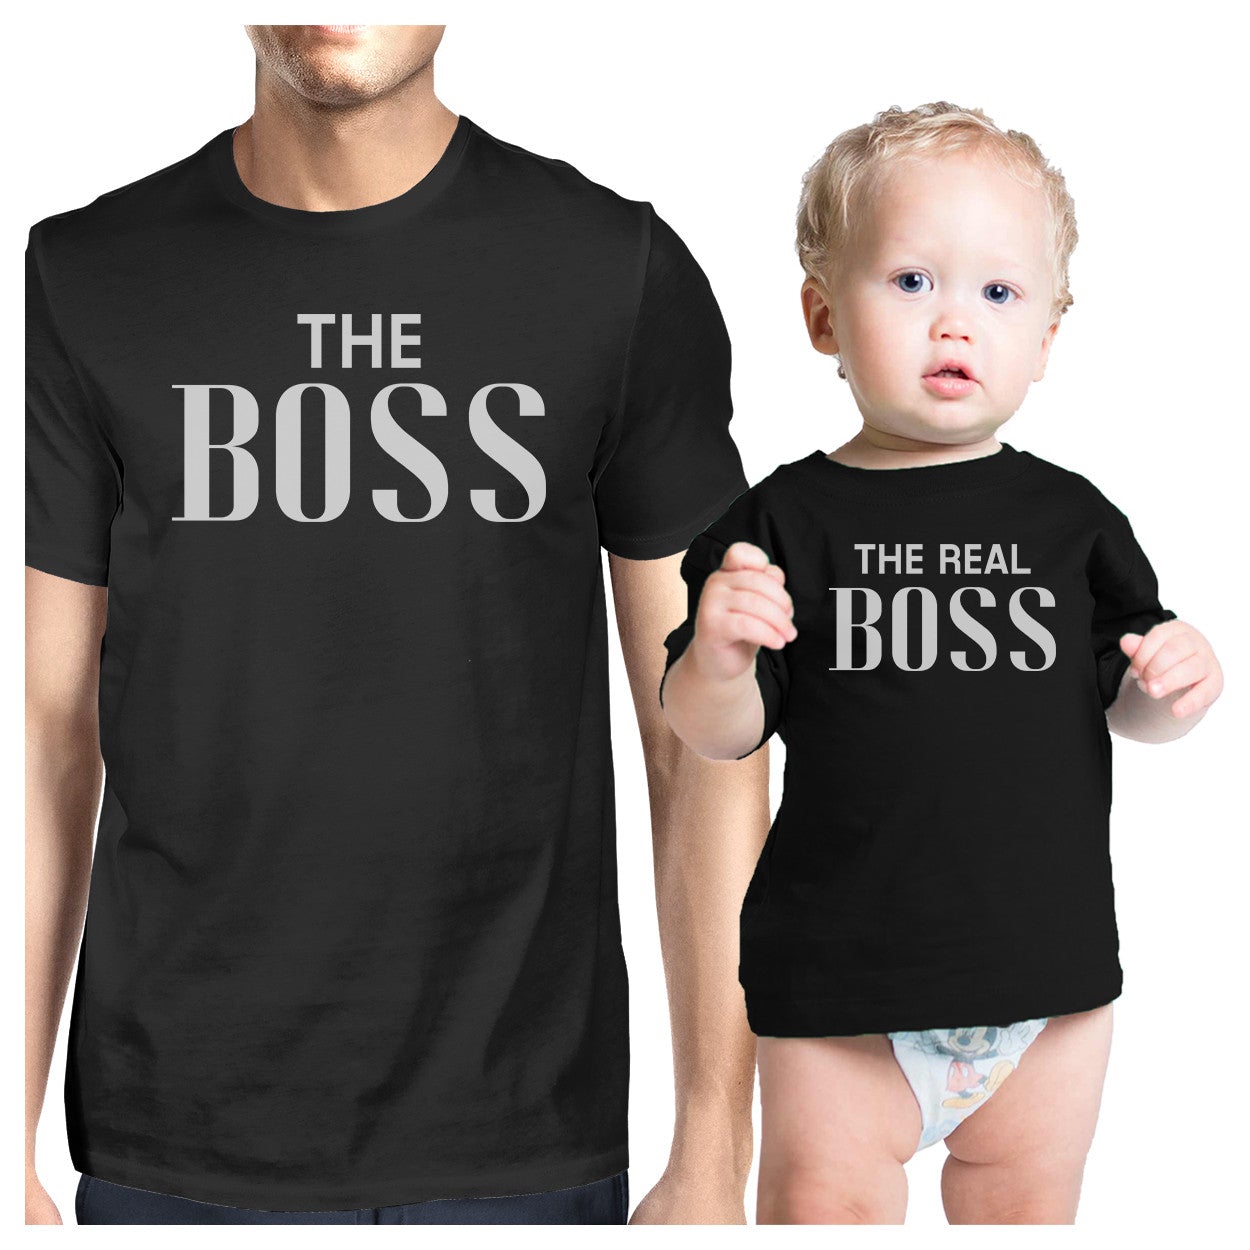 The Real Boss Black Matching Graphic T-Shirts For Dad And Baby Boy - 365 In Love